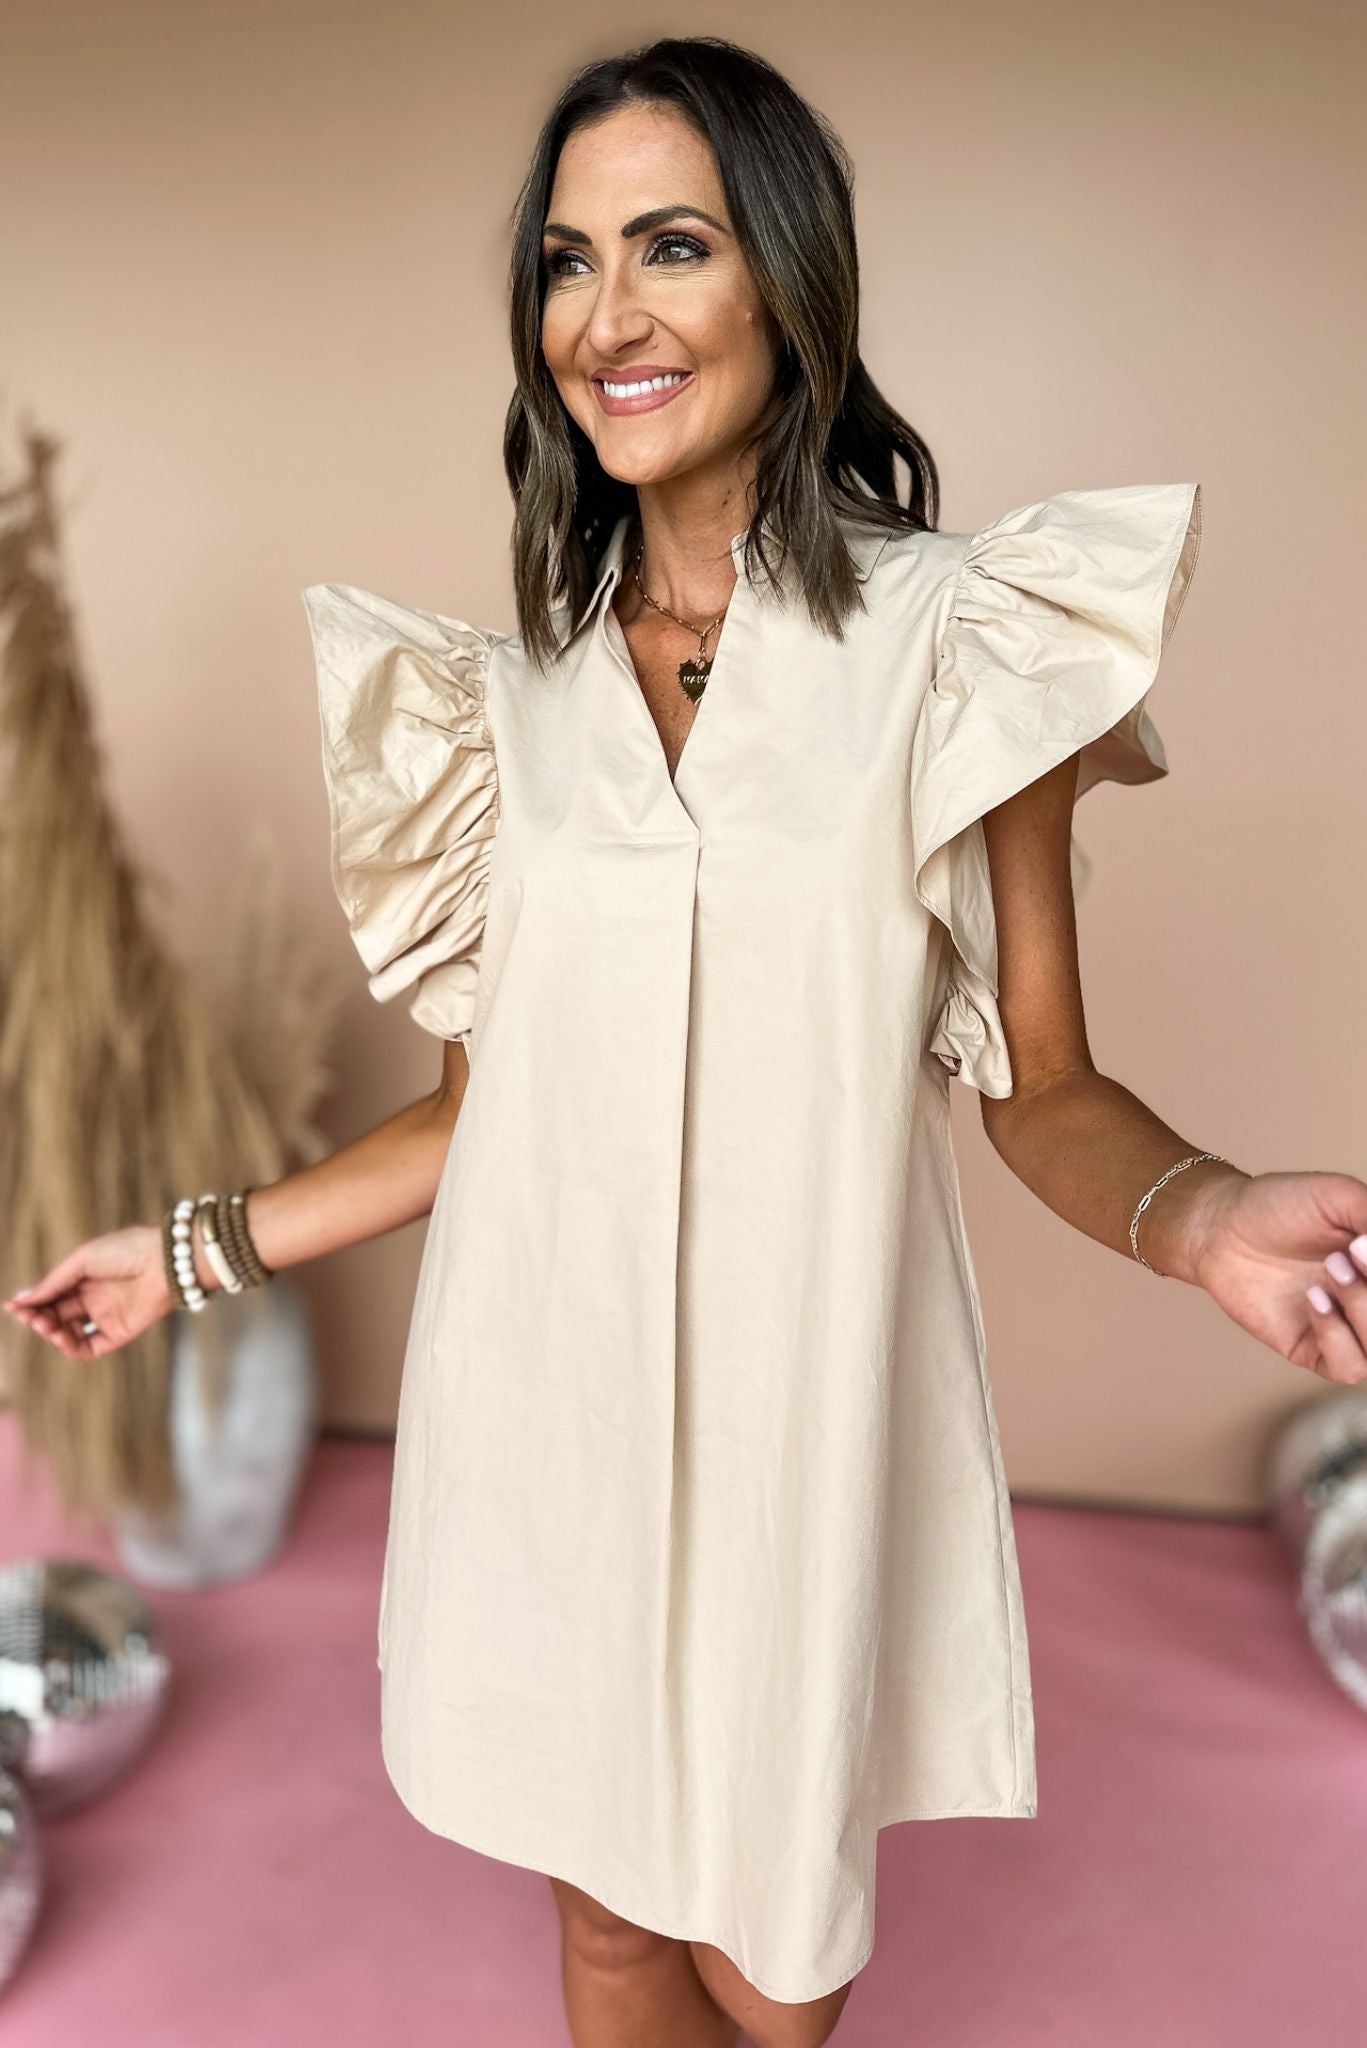 SSYS Taupe Ruffle Shoulder Poplin Dress, ruffle detail, poplin, pleated front, mom style, must have, shop style your senses by mallory fitzsimmons